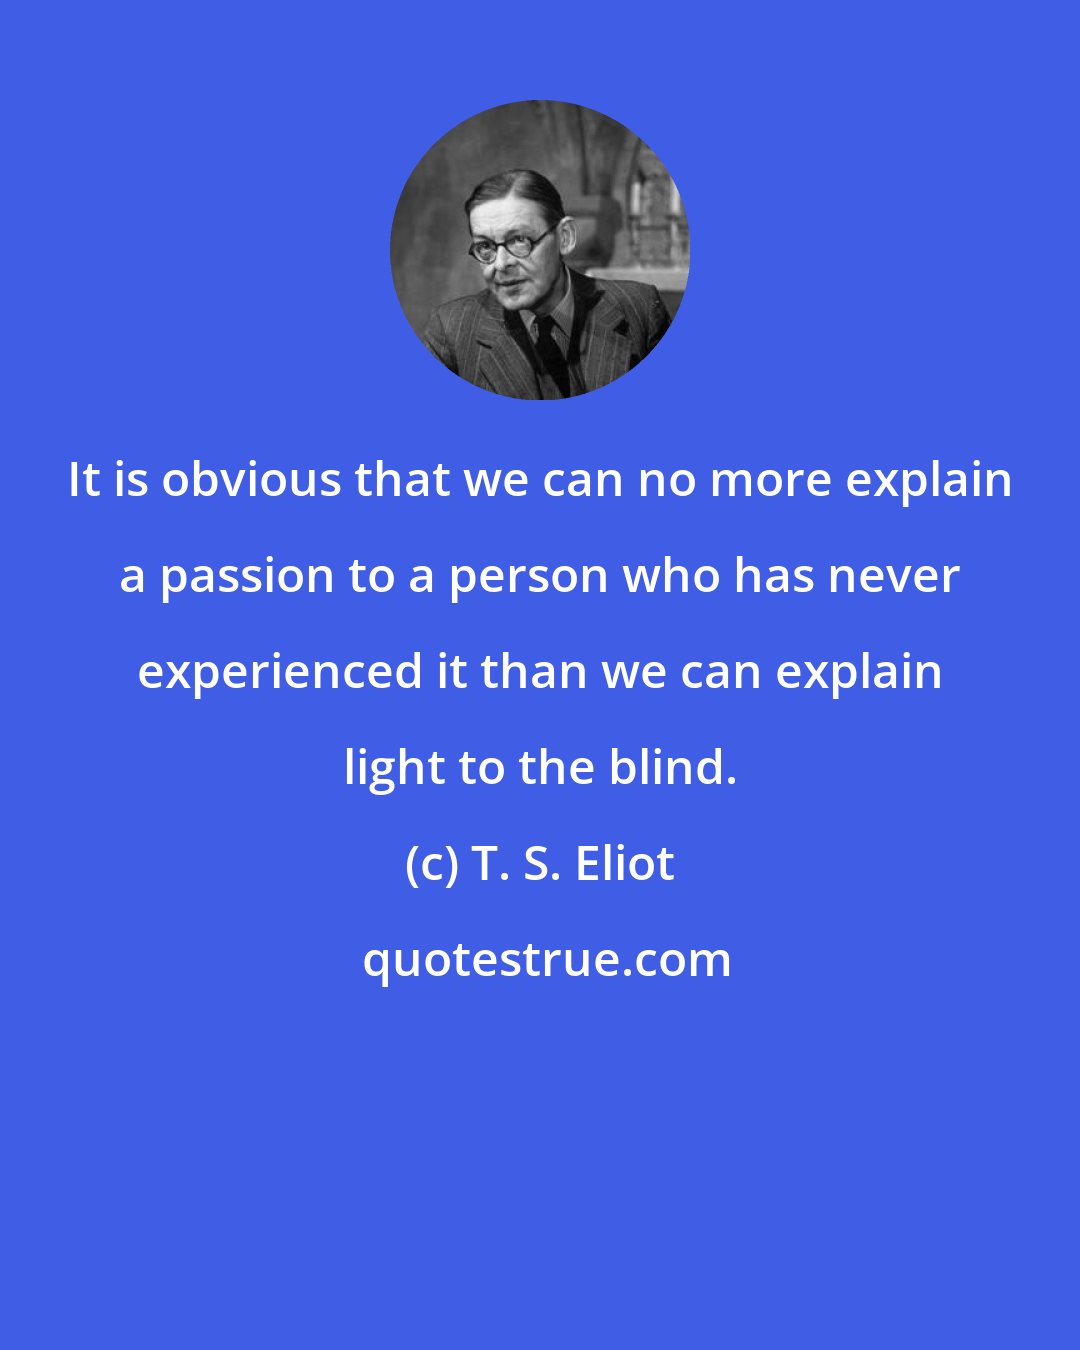 T. S. Eliot: It is obvious that we can no more explain a passion to a person who has never experienced it than we can explain light to the blind.